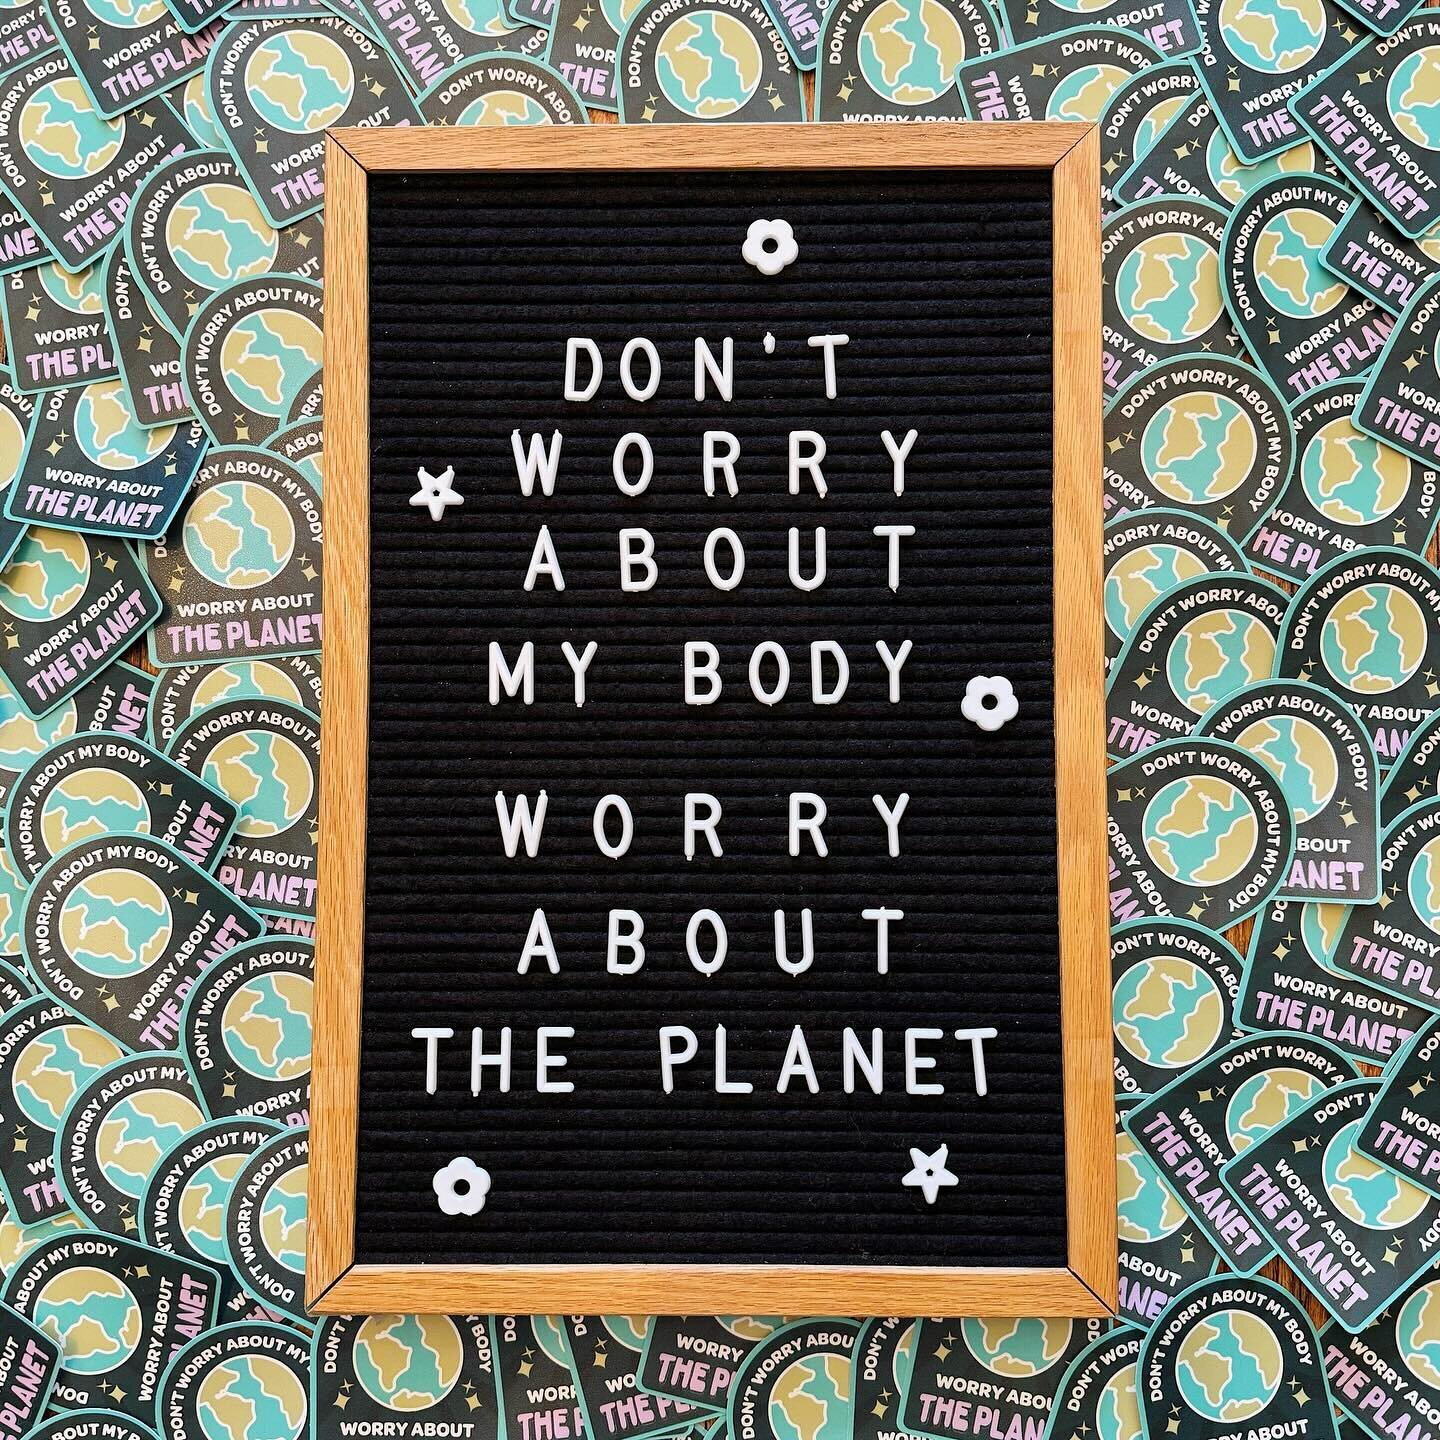 🌍 Don't worry about my body, worry about the planet! 🌎 

You can get one of these stickers for $5 in store or ask us to add it to your invoice if you need shipping 🌷✨